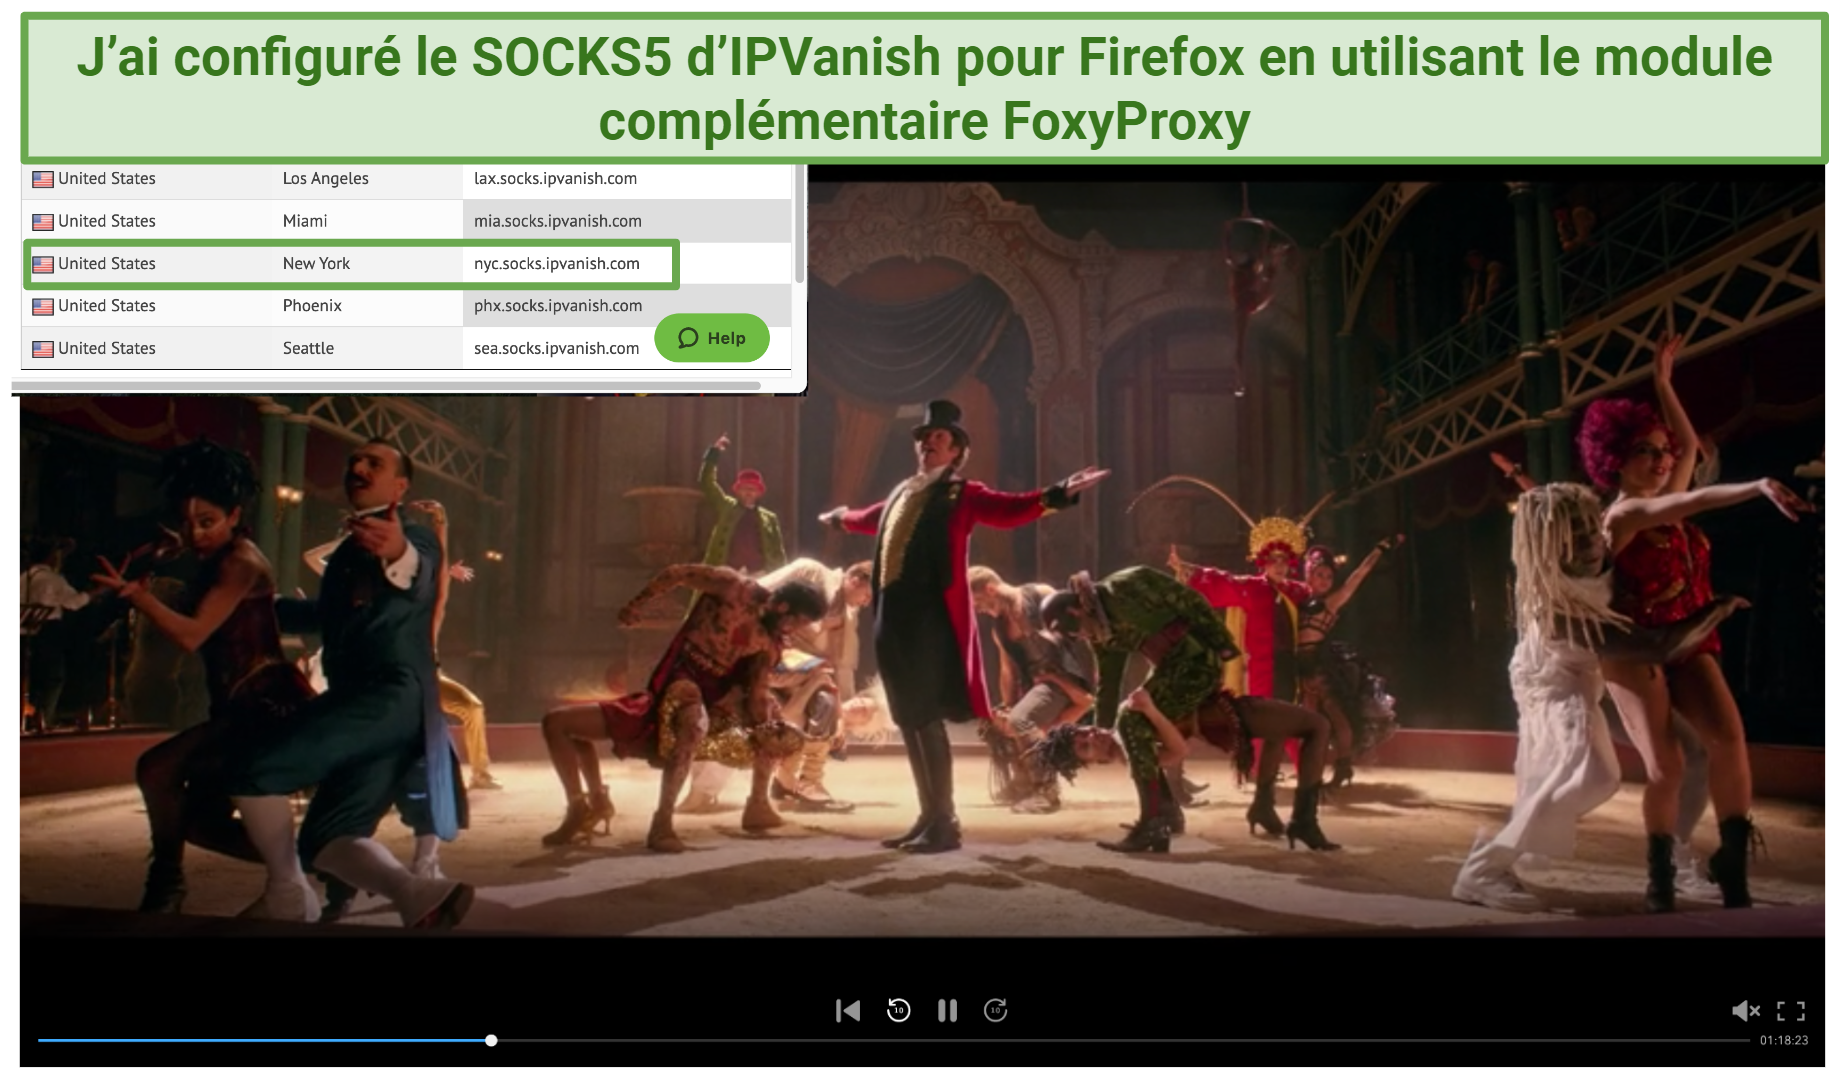 Screenshot showing how to access SOCKS5 login details from the IPVanish website to stream movies